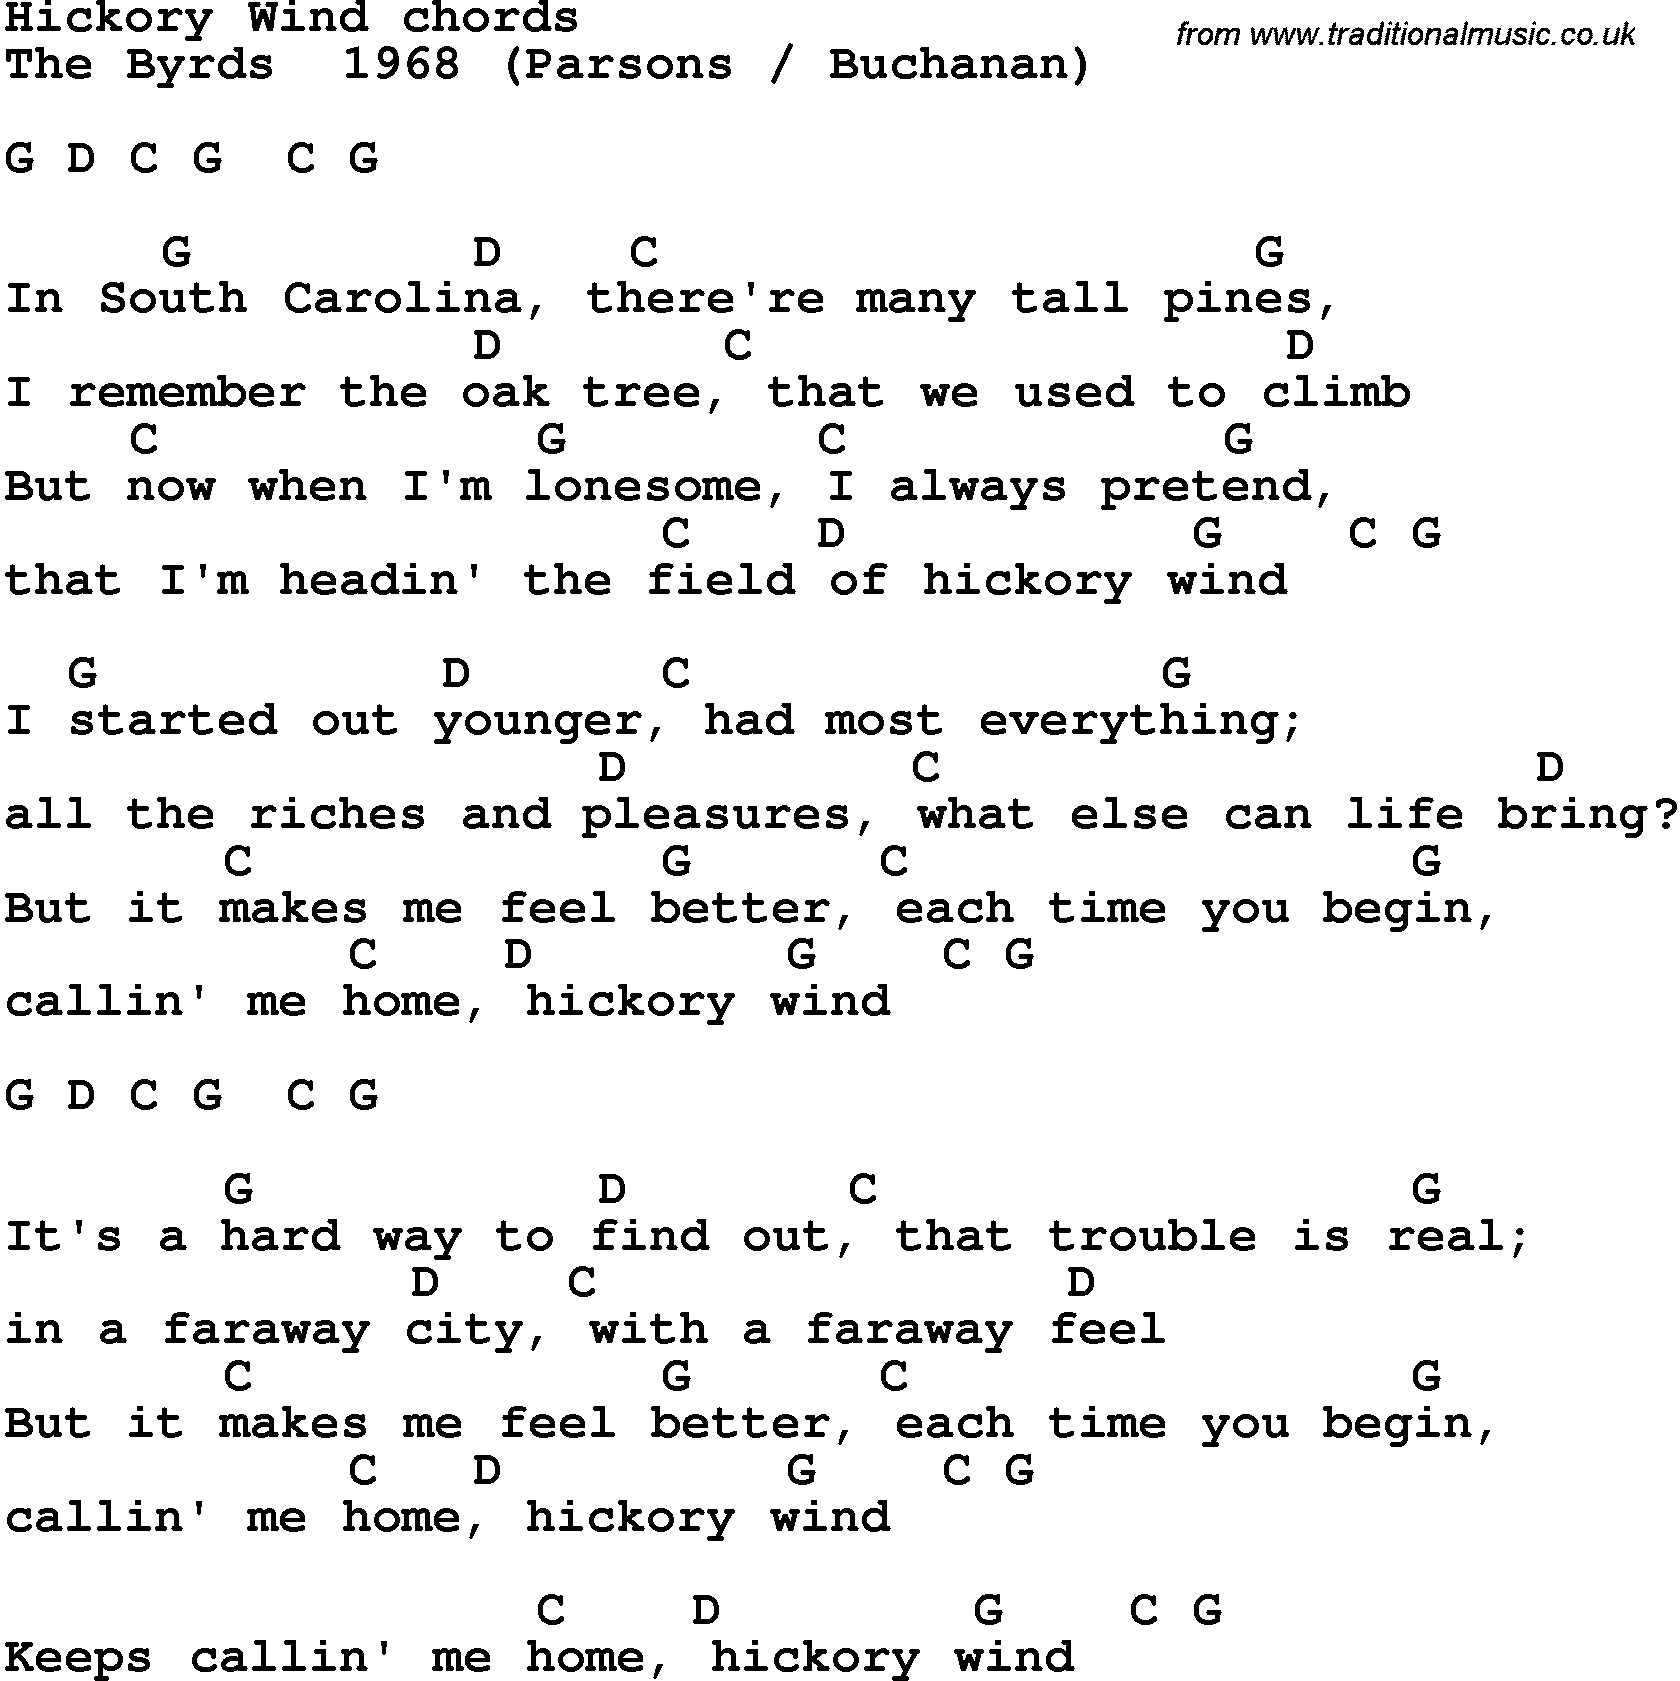 Song Lyrics with guitar chords for Hickory Wind